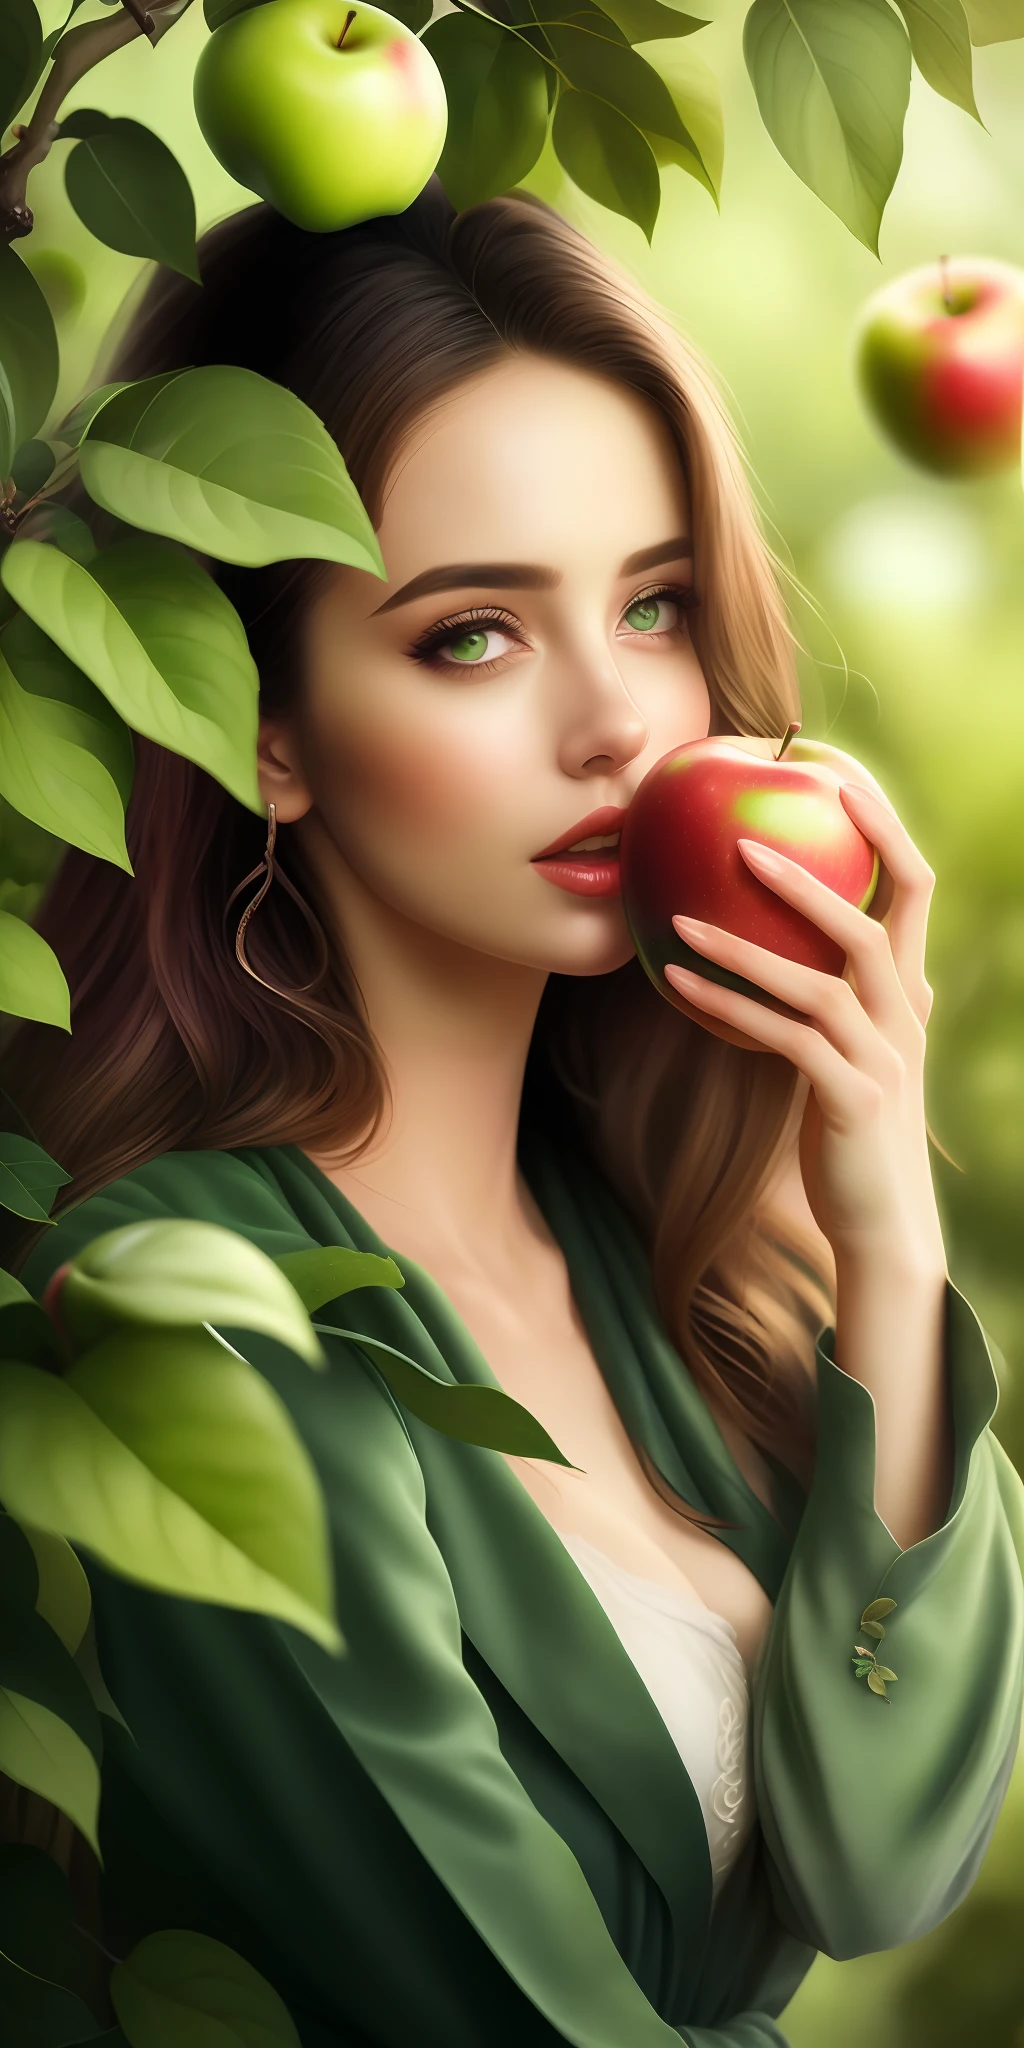 Best quality,highest resolution,8k, artistic illustration, beautiful portrait, masterpiece, most beautiful woman,most beautiful girl, greedy eyes, biting an apple,dressed in leaves, dressed in green leaves,the most beautiful girl in profile in front of an apple tree, greedy eyes,, an apple tree, biting an apple